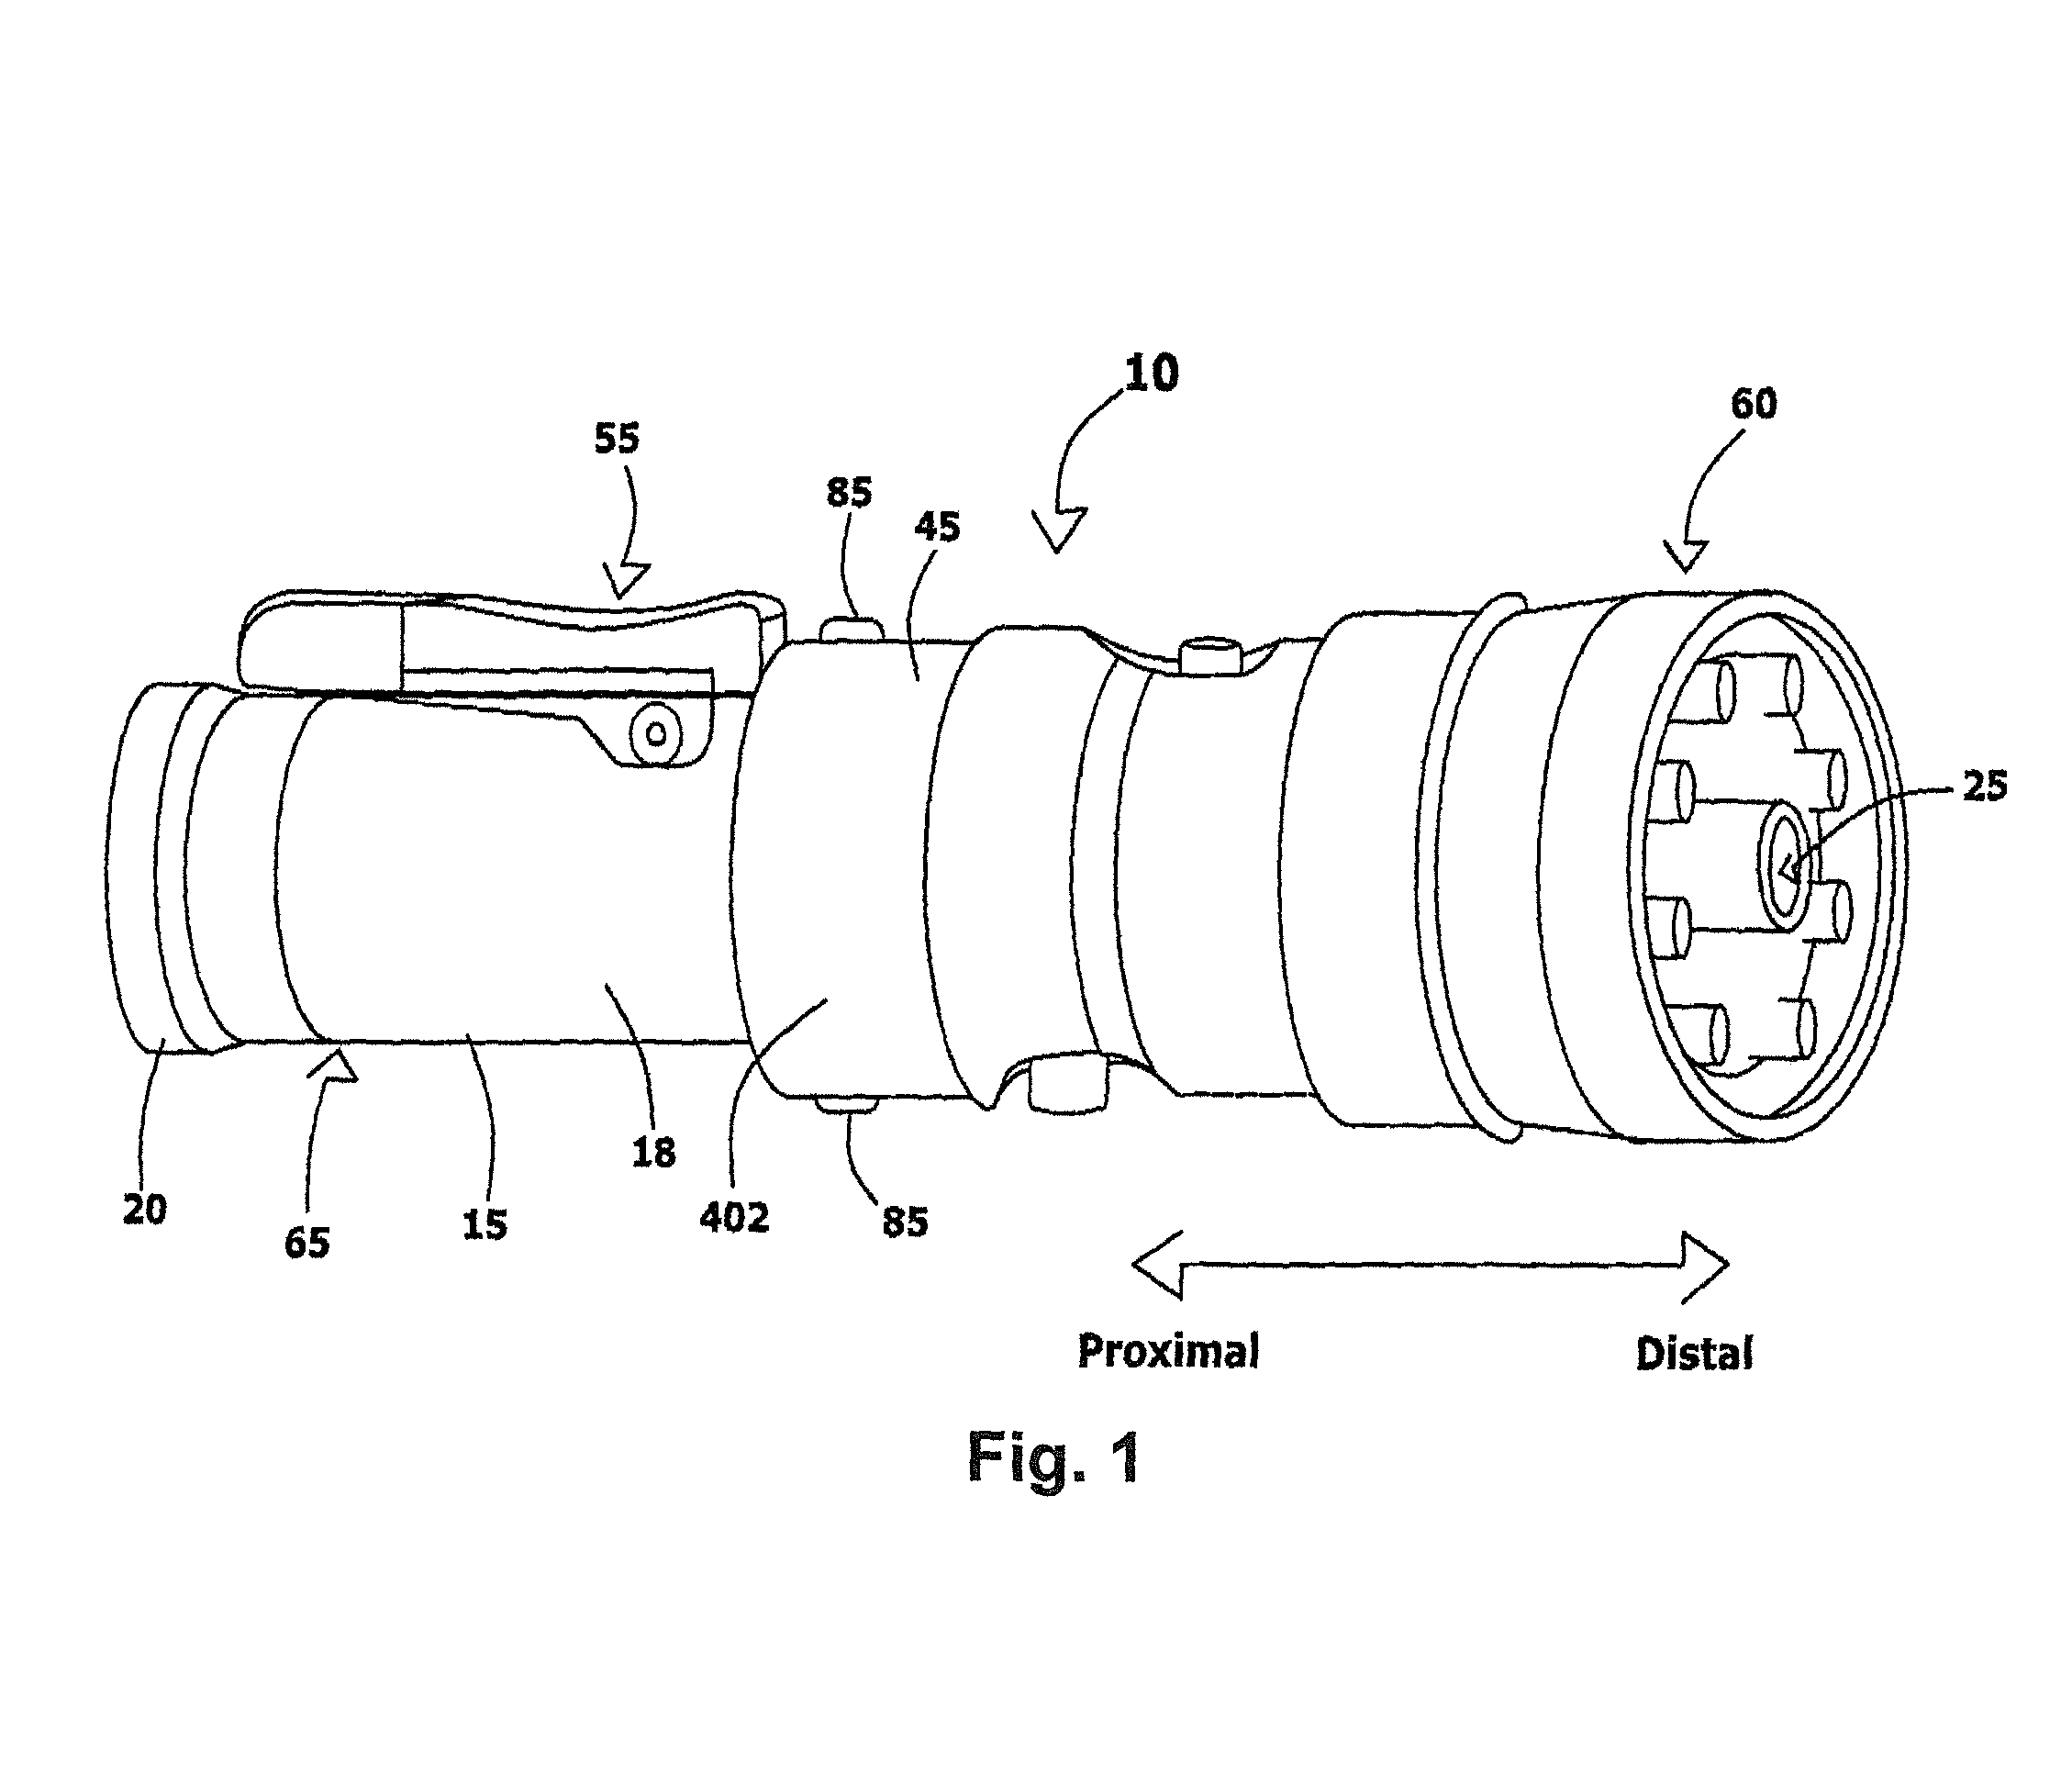 Systems and methods for providing a customizable firearm